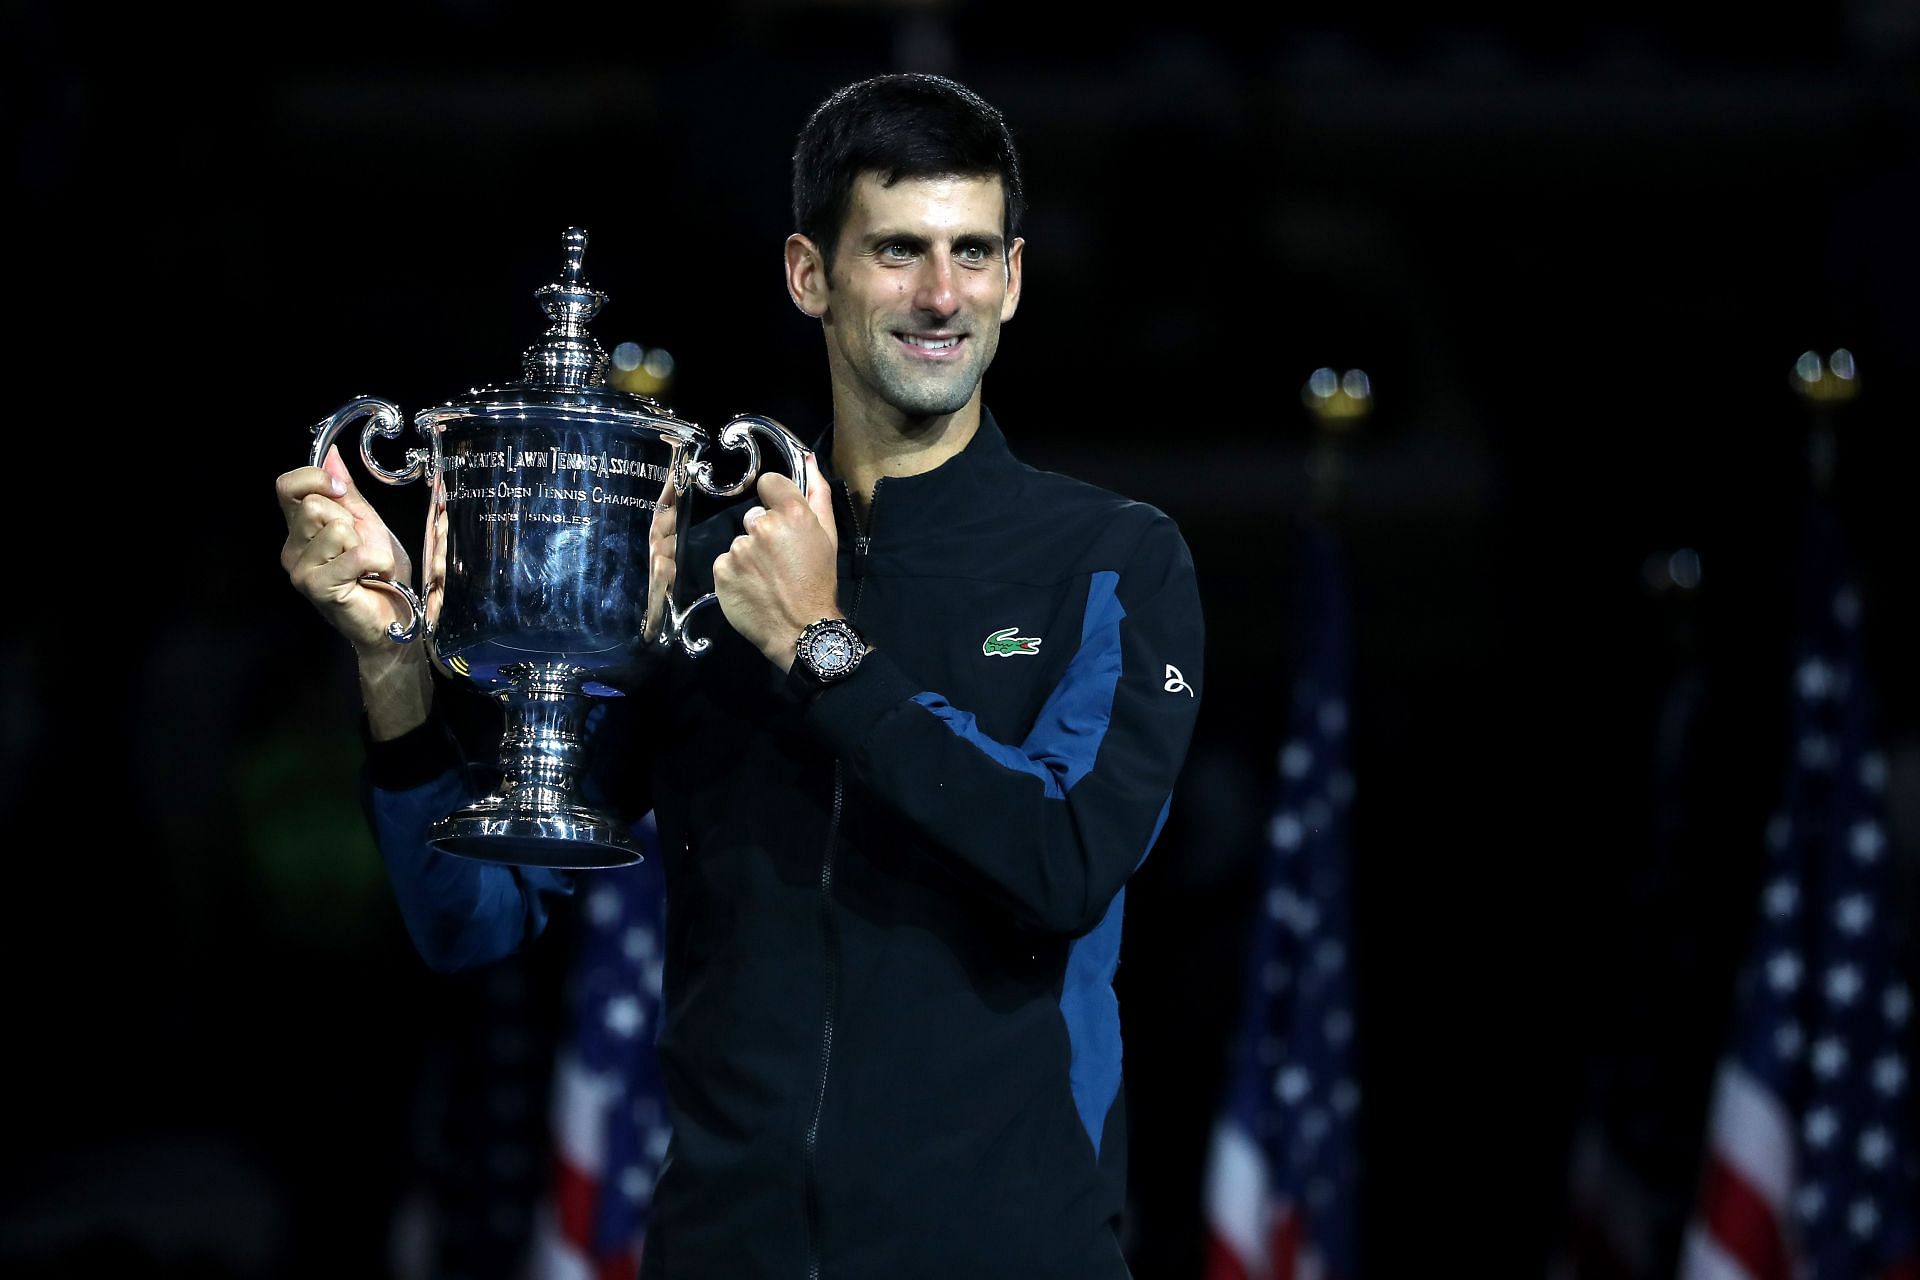 The Serb won the 2018 US Open